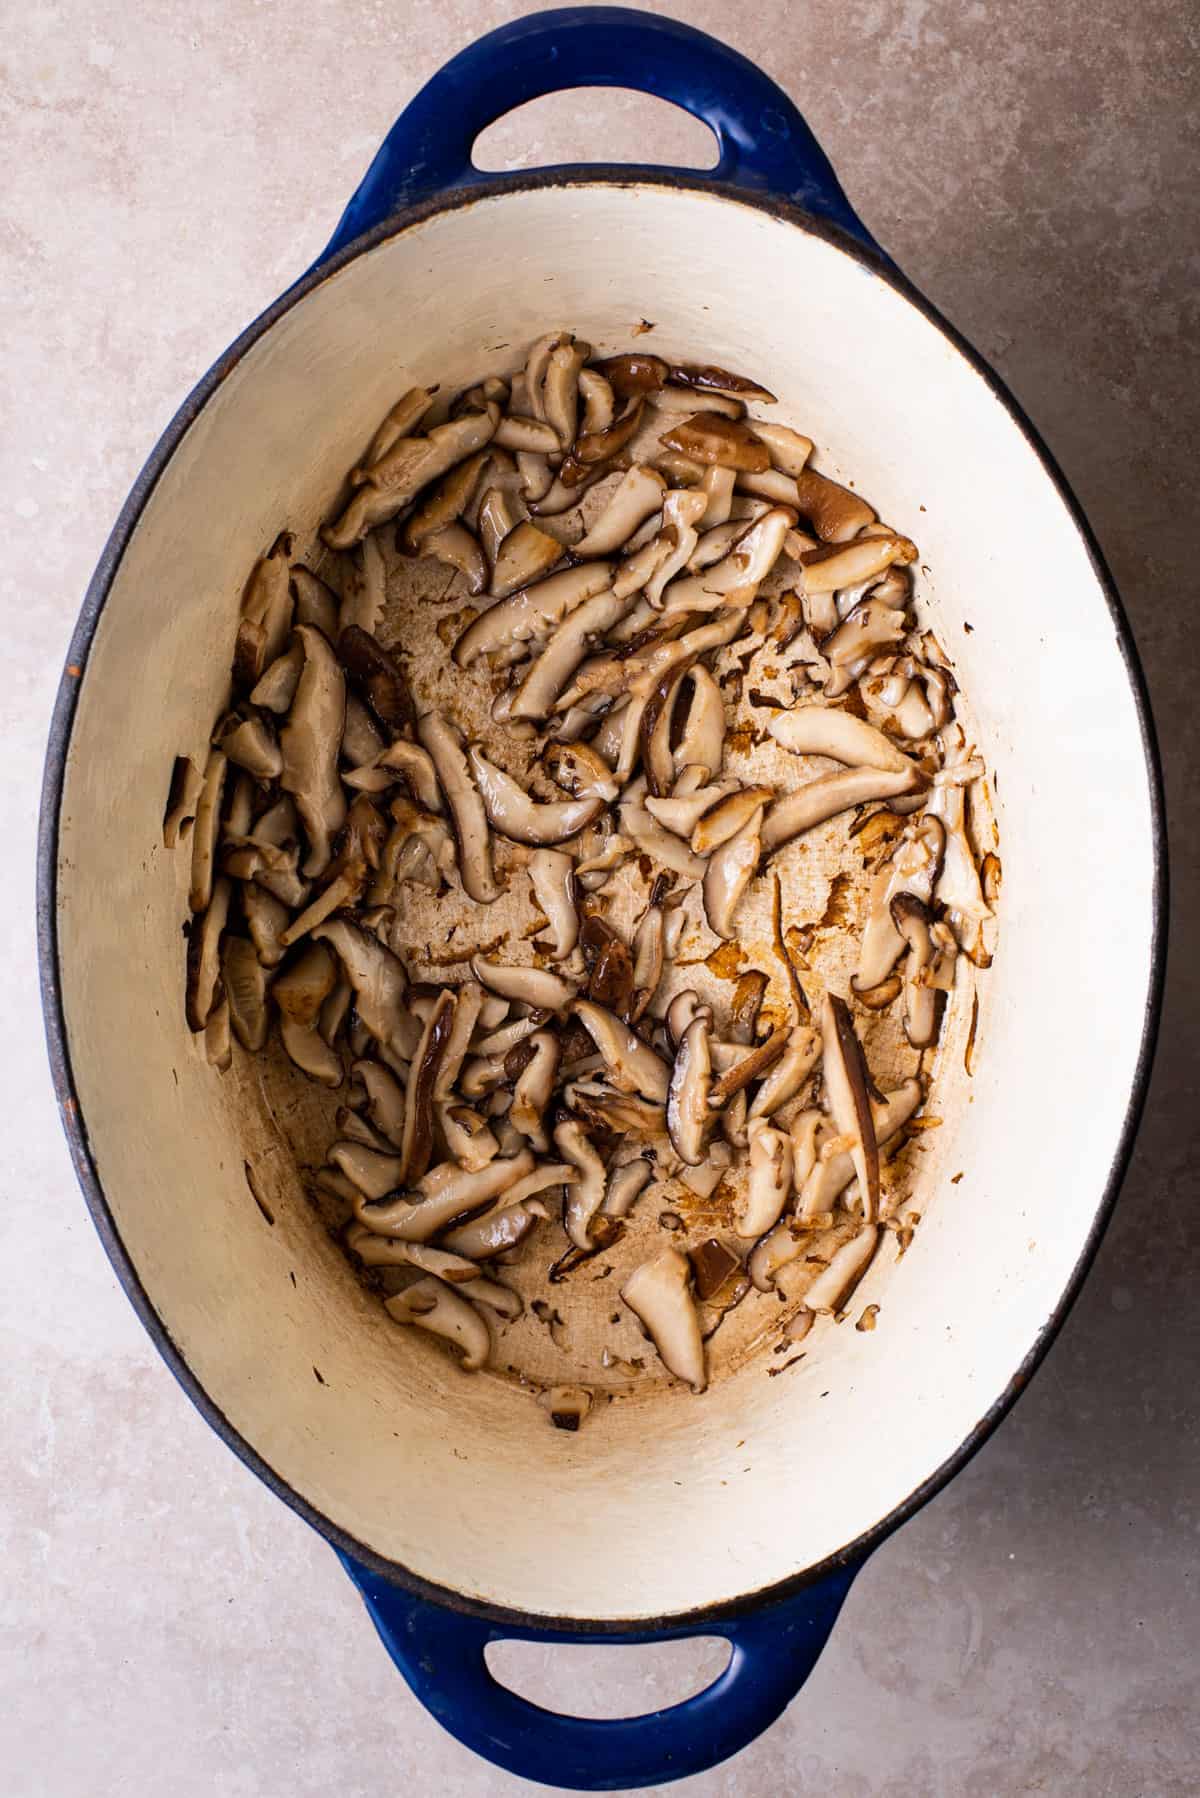 Sauteed sliced shiitakes in a Dutch oven.